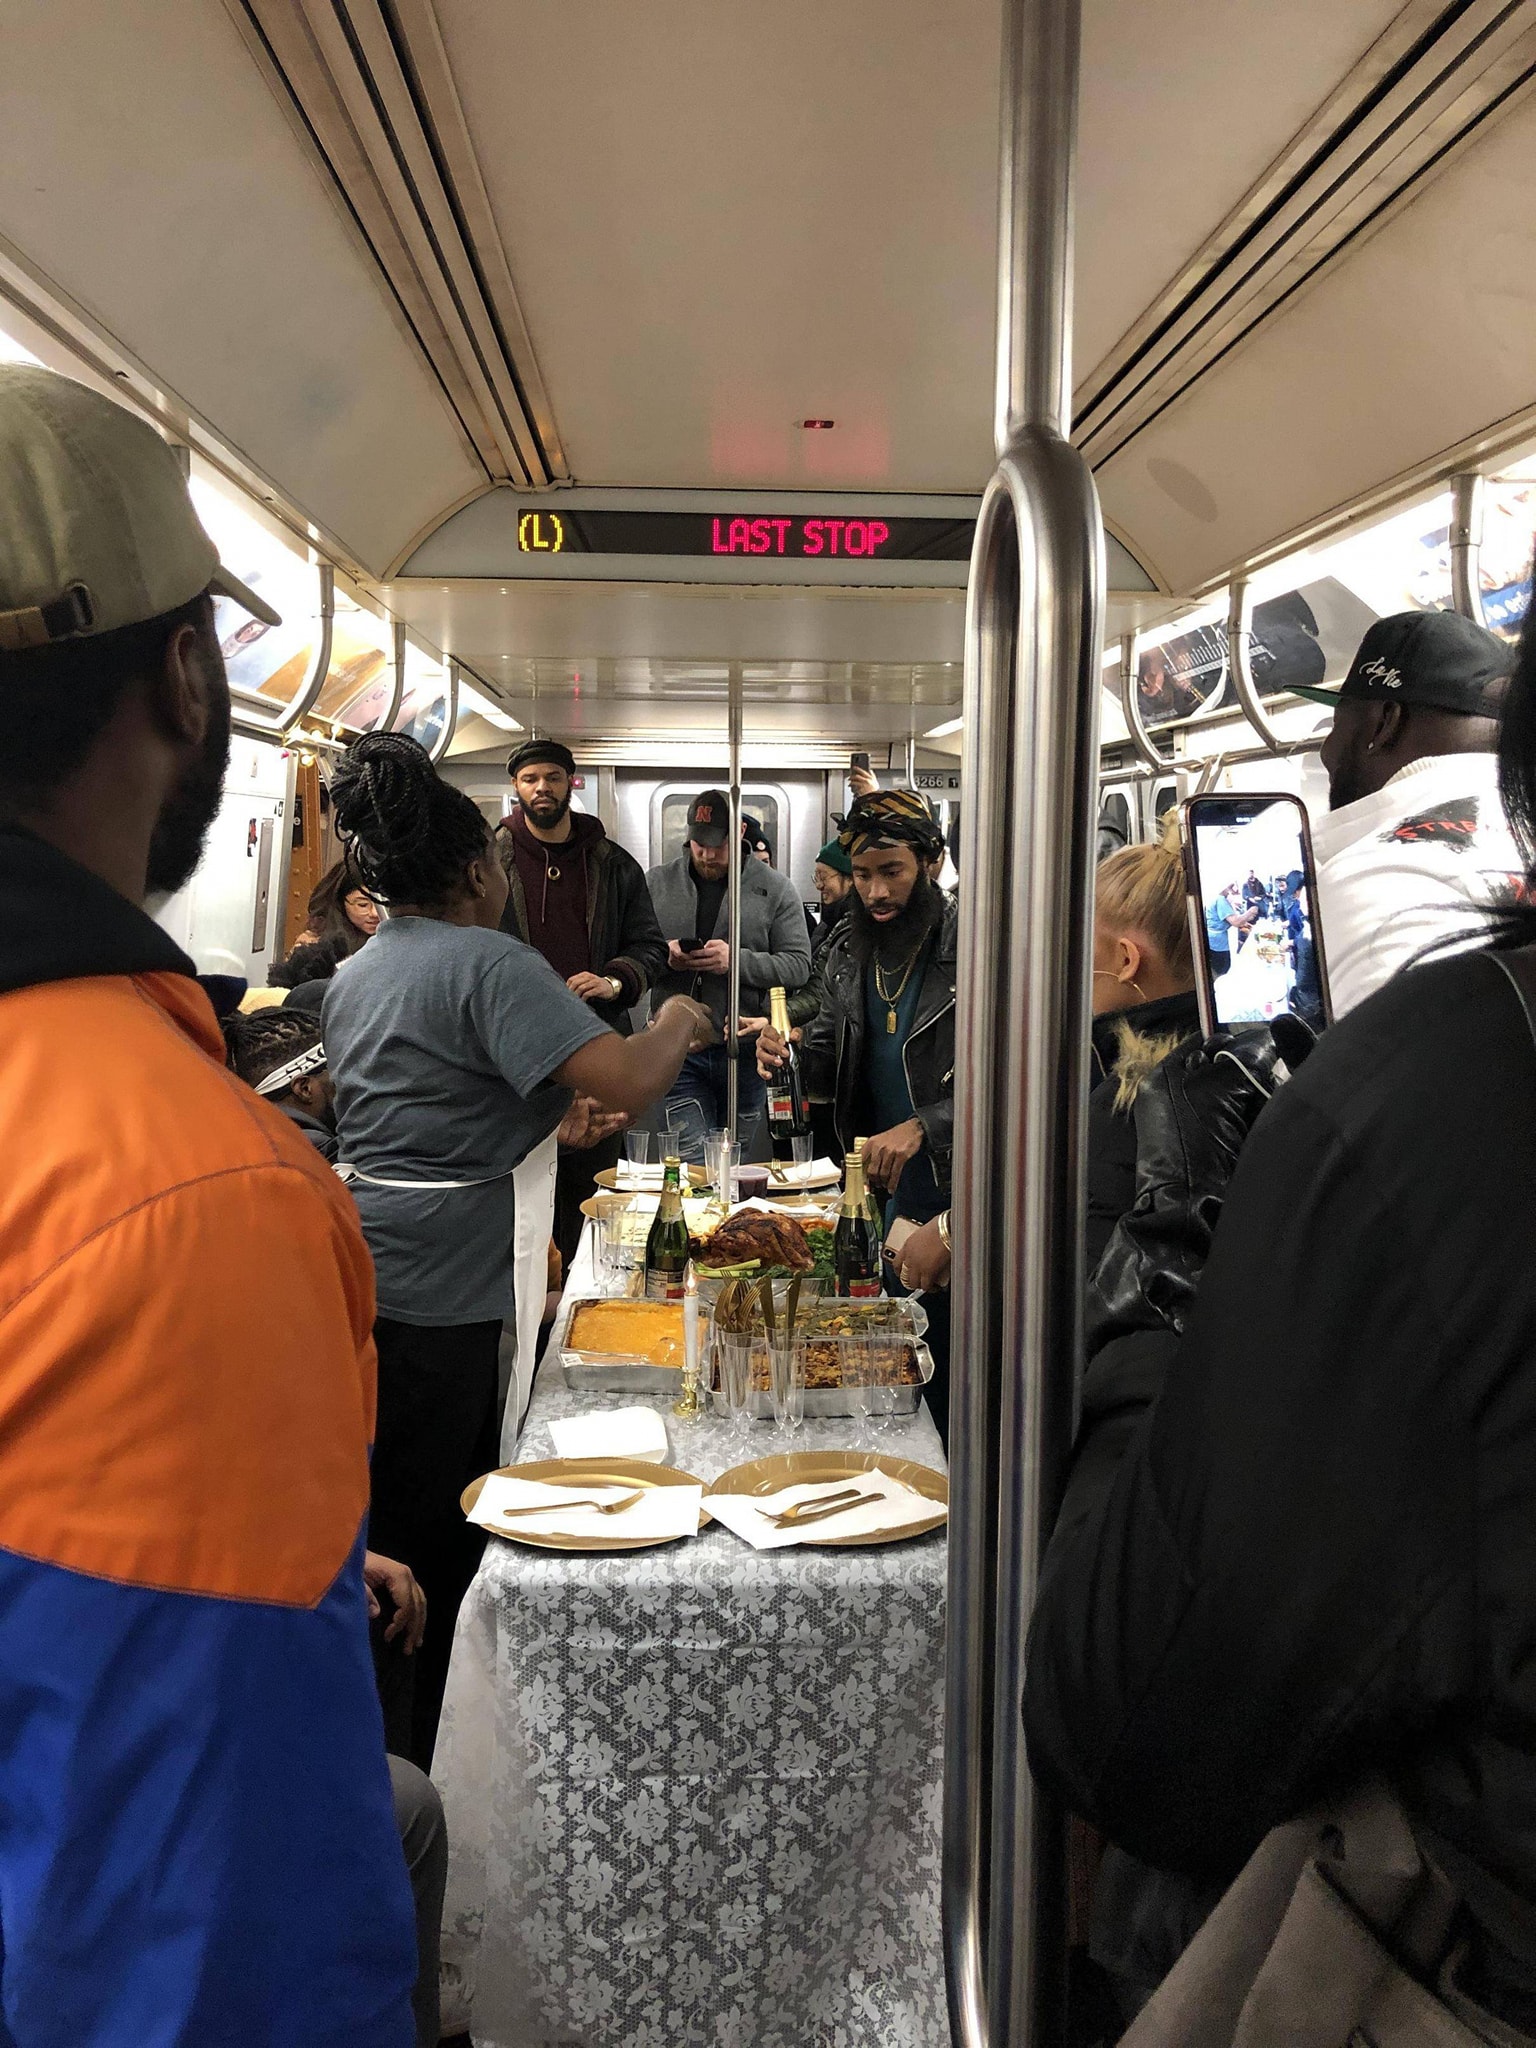 nyc subway thanksgiving dinner - L Brst Stop